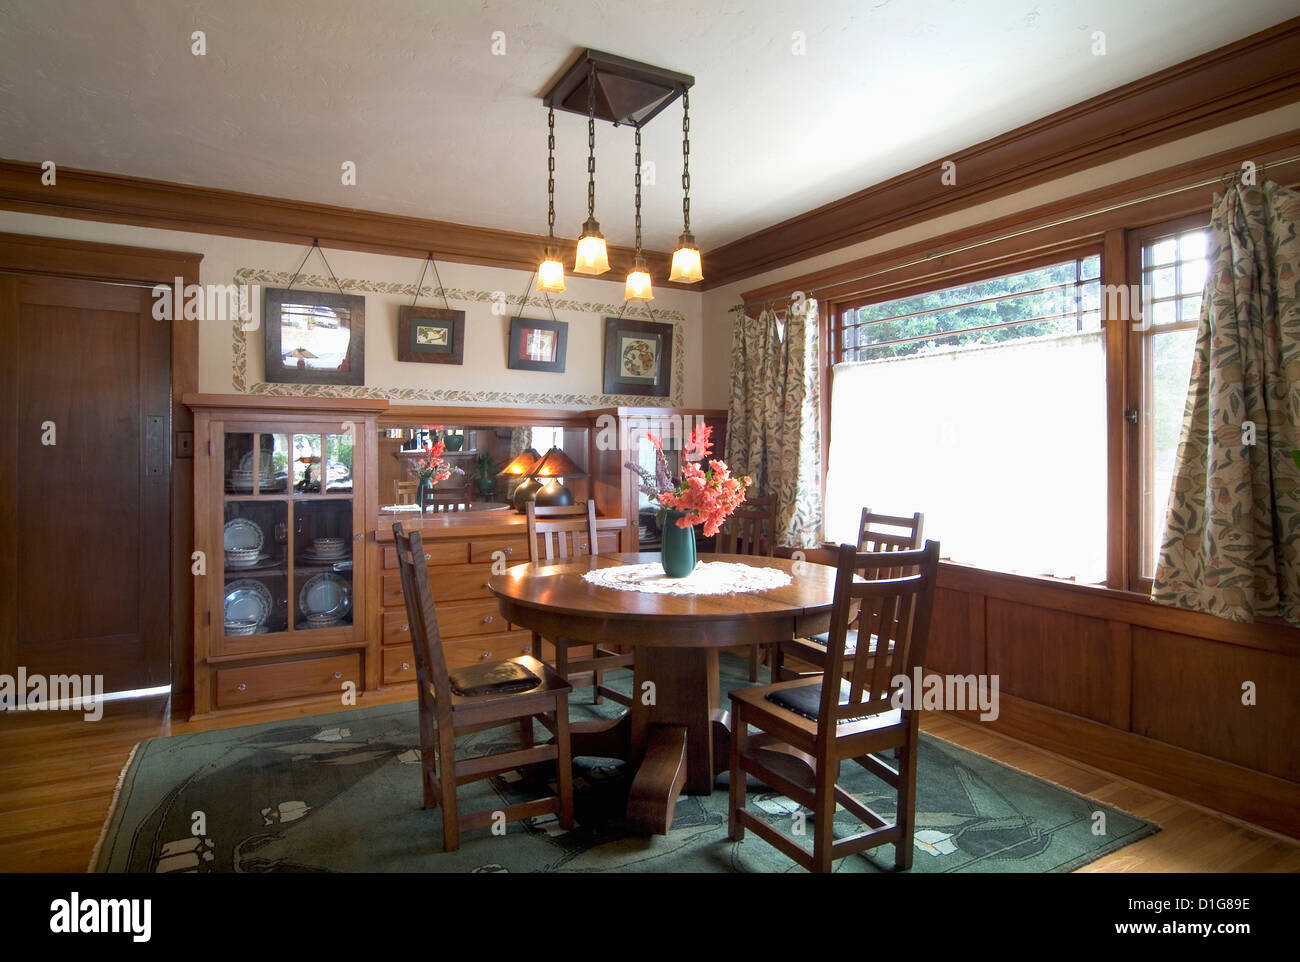 Dining Room In Bungalow Home San Diego California Usa Stock Photo Alamy